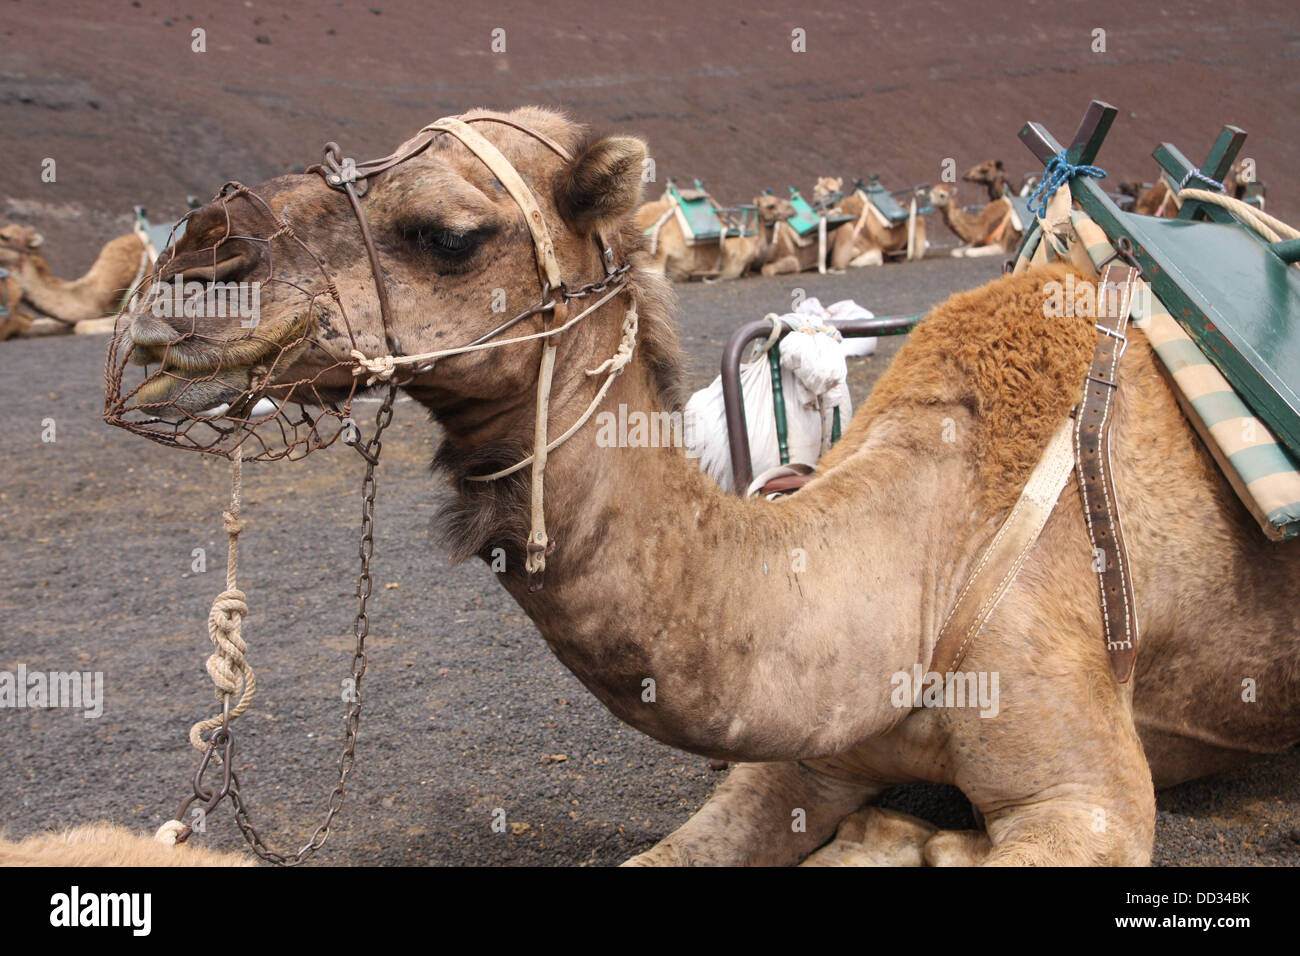 Camel in train for tourists Stock Photo